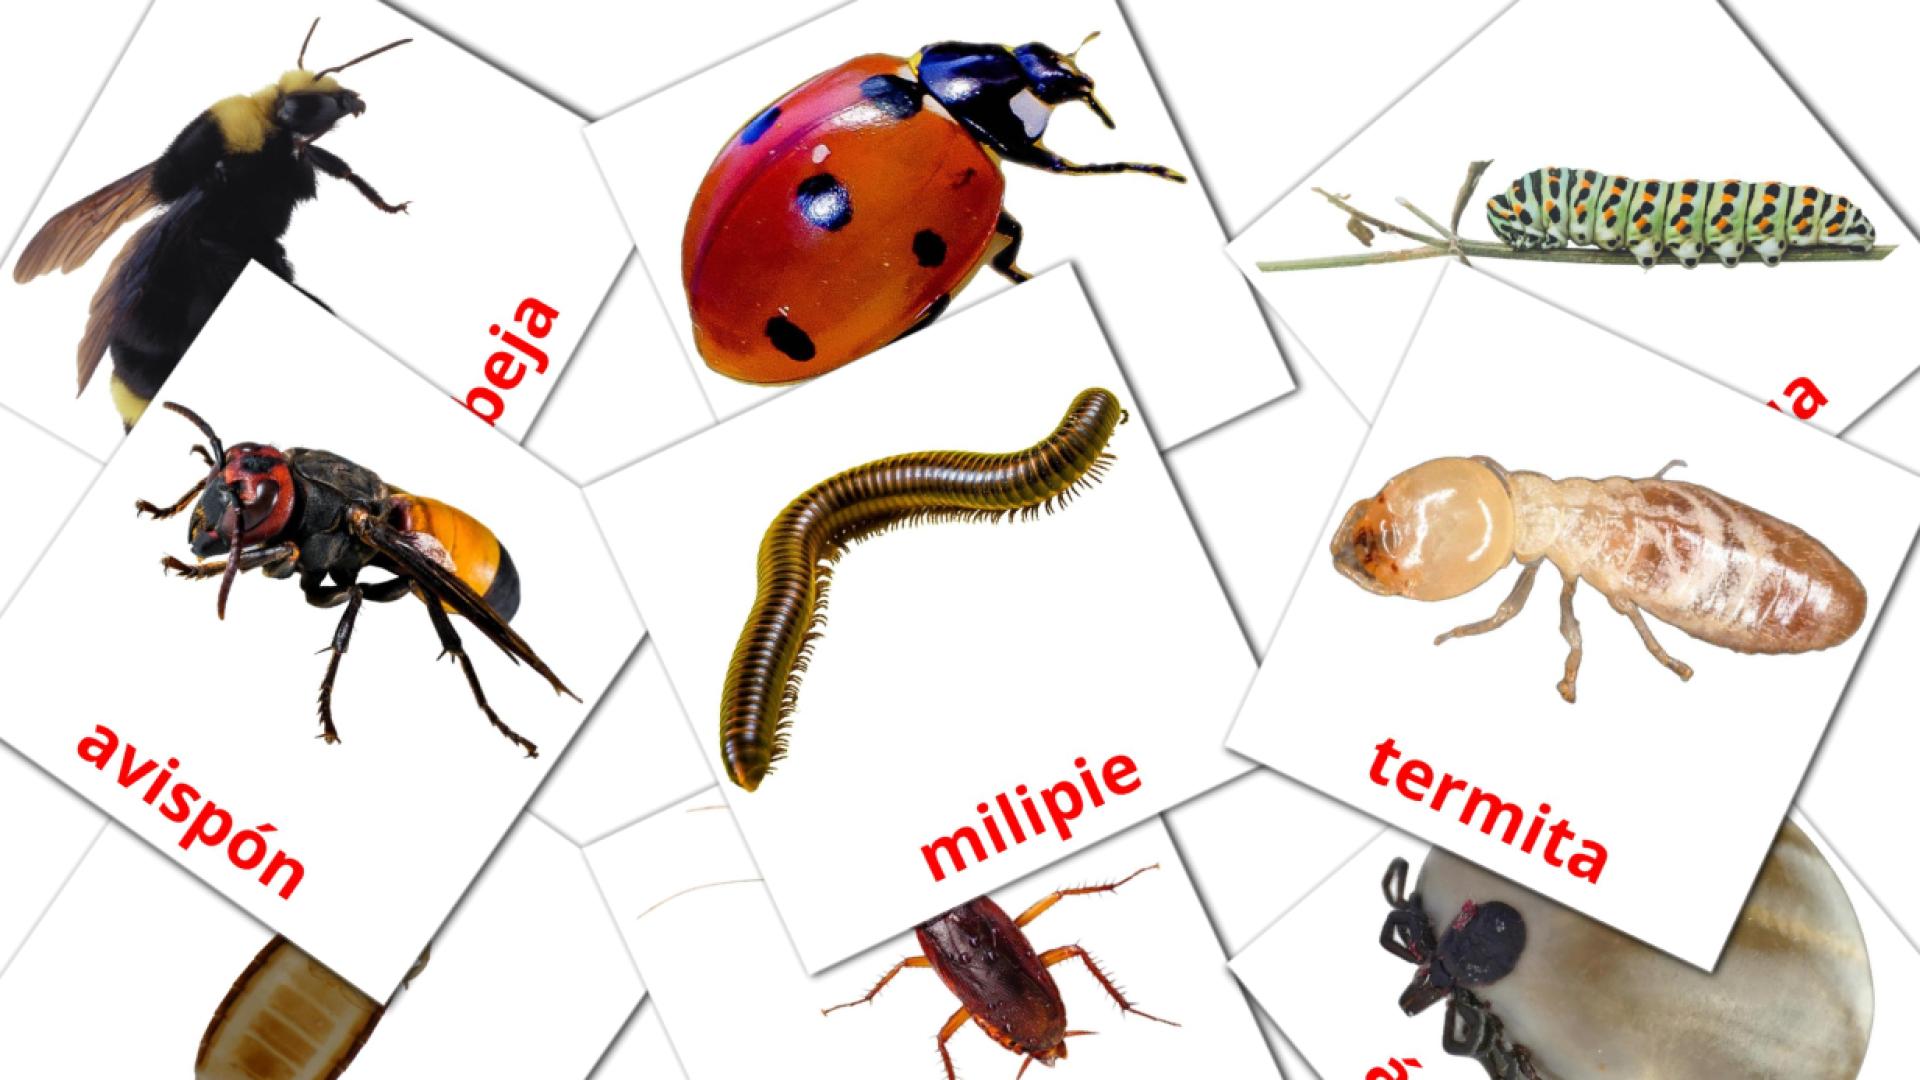 23 Insectos flashcards